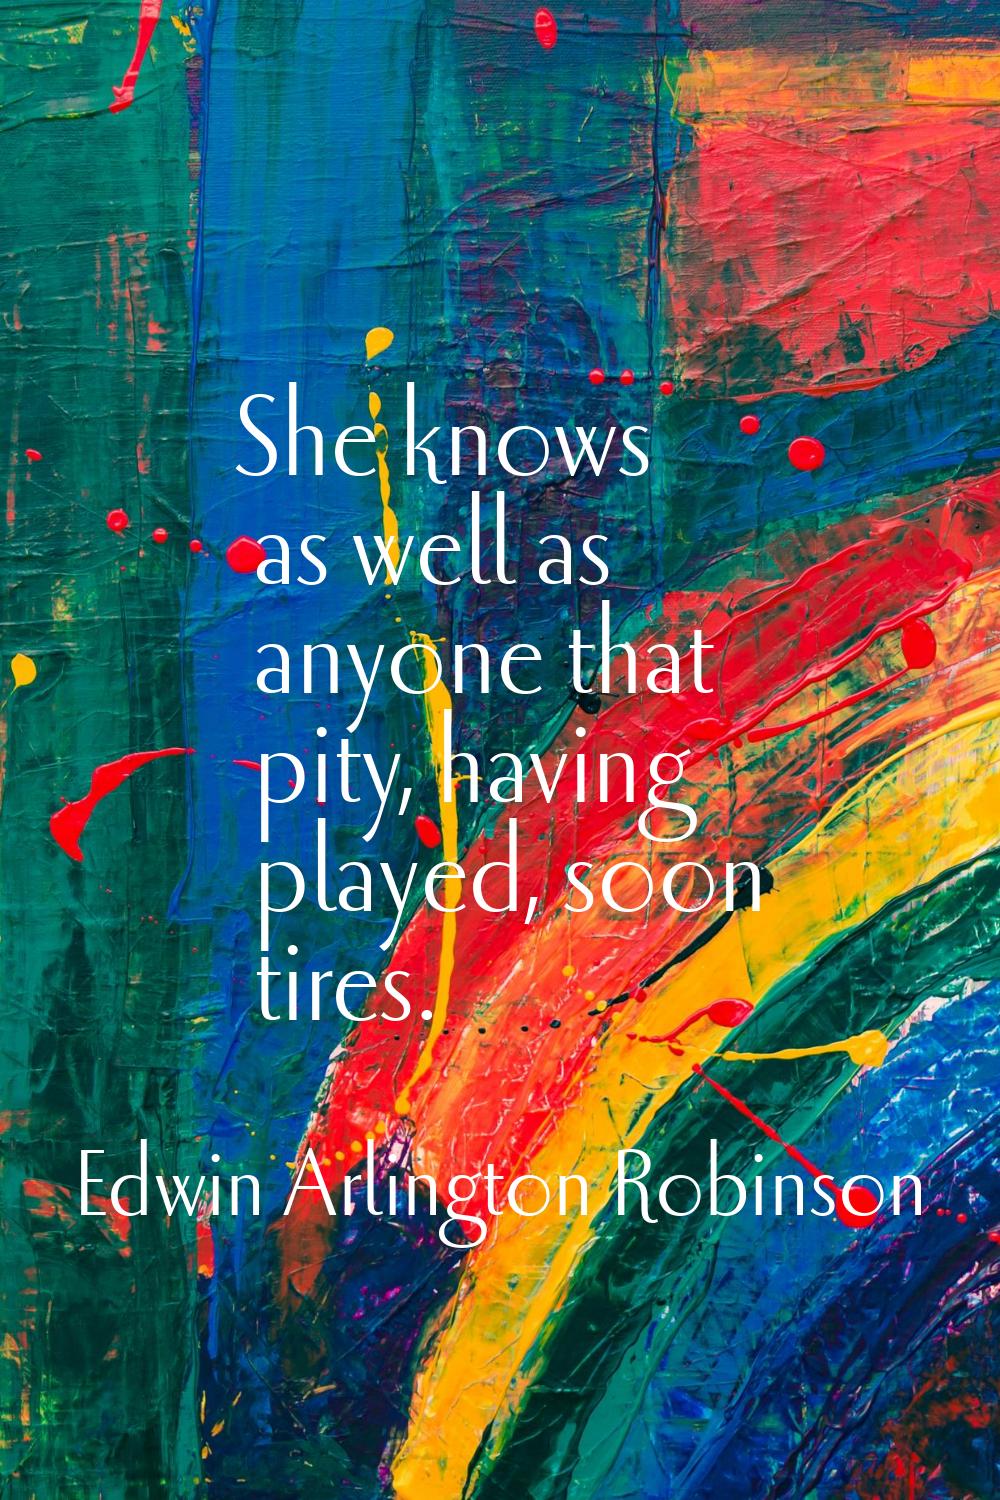 She knows as well as anyone that pity, having played, soon tires.